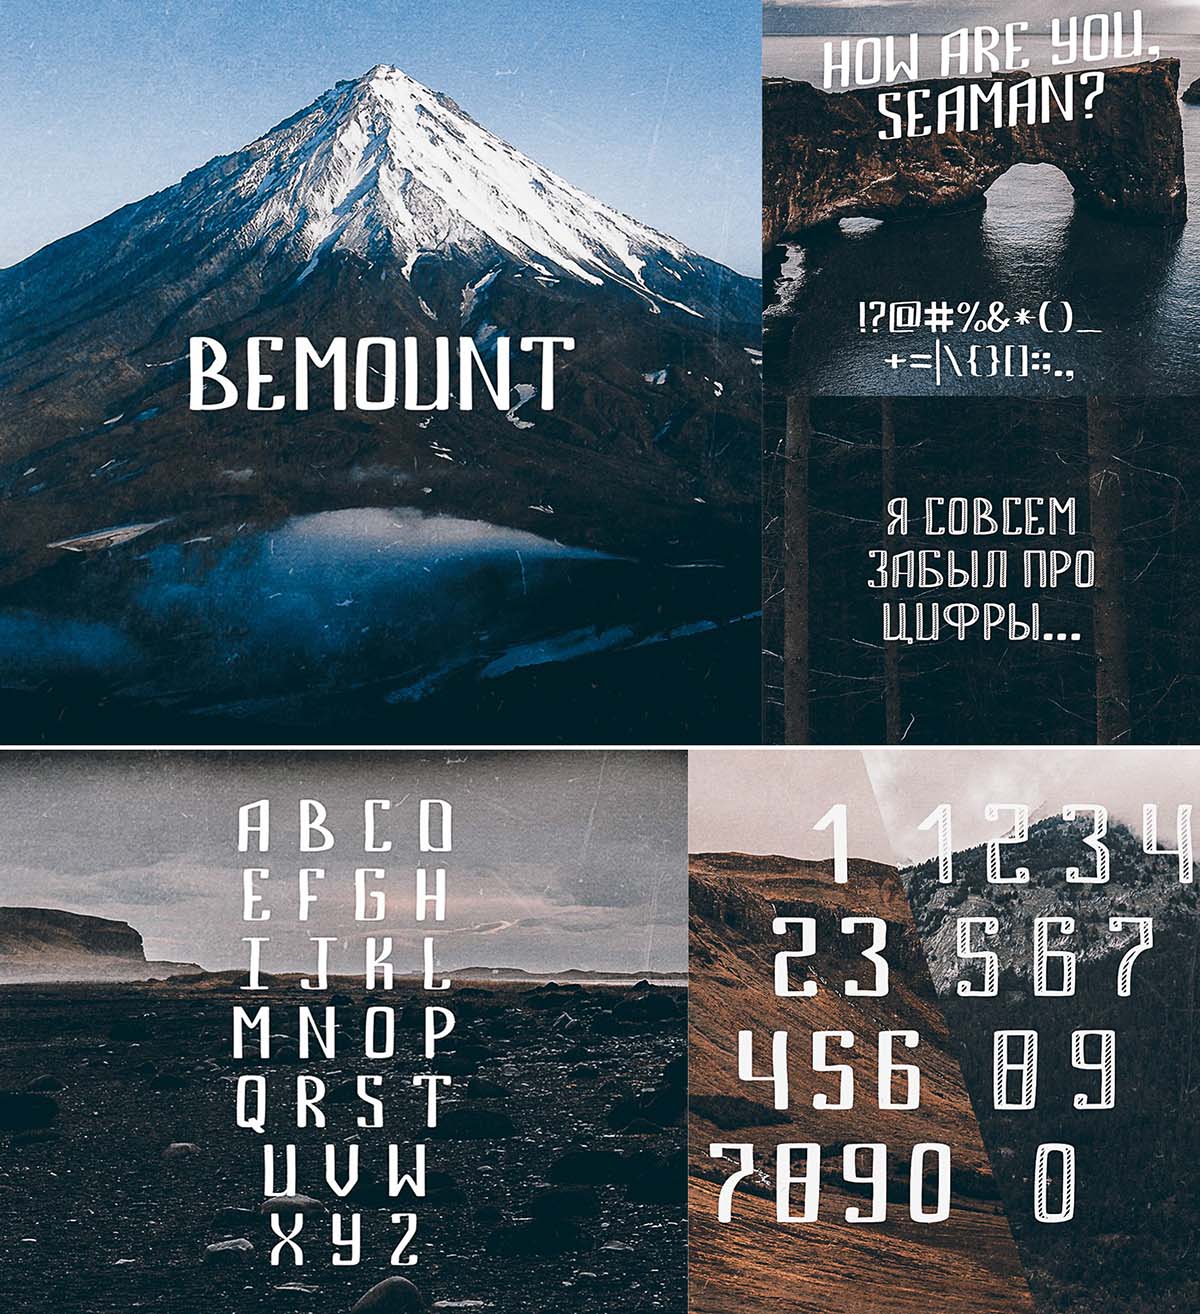 Bemount free font with cyrillic and roman typeface